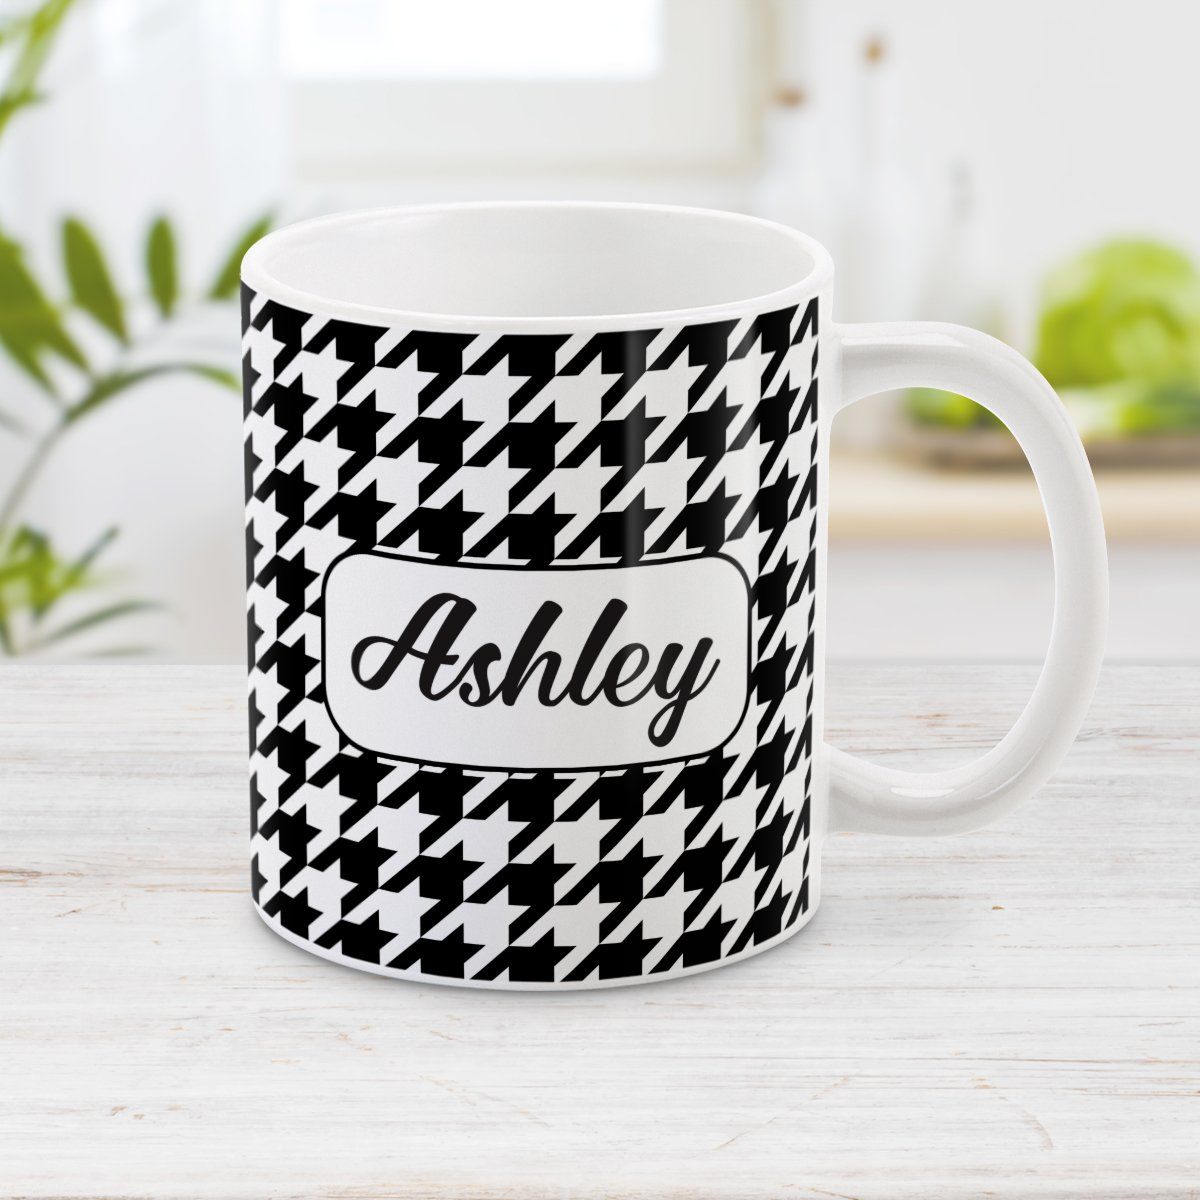 Personalized Black and White Houndstooth Mug at Amy's Coffee Mugs